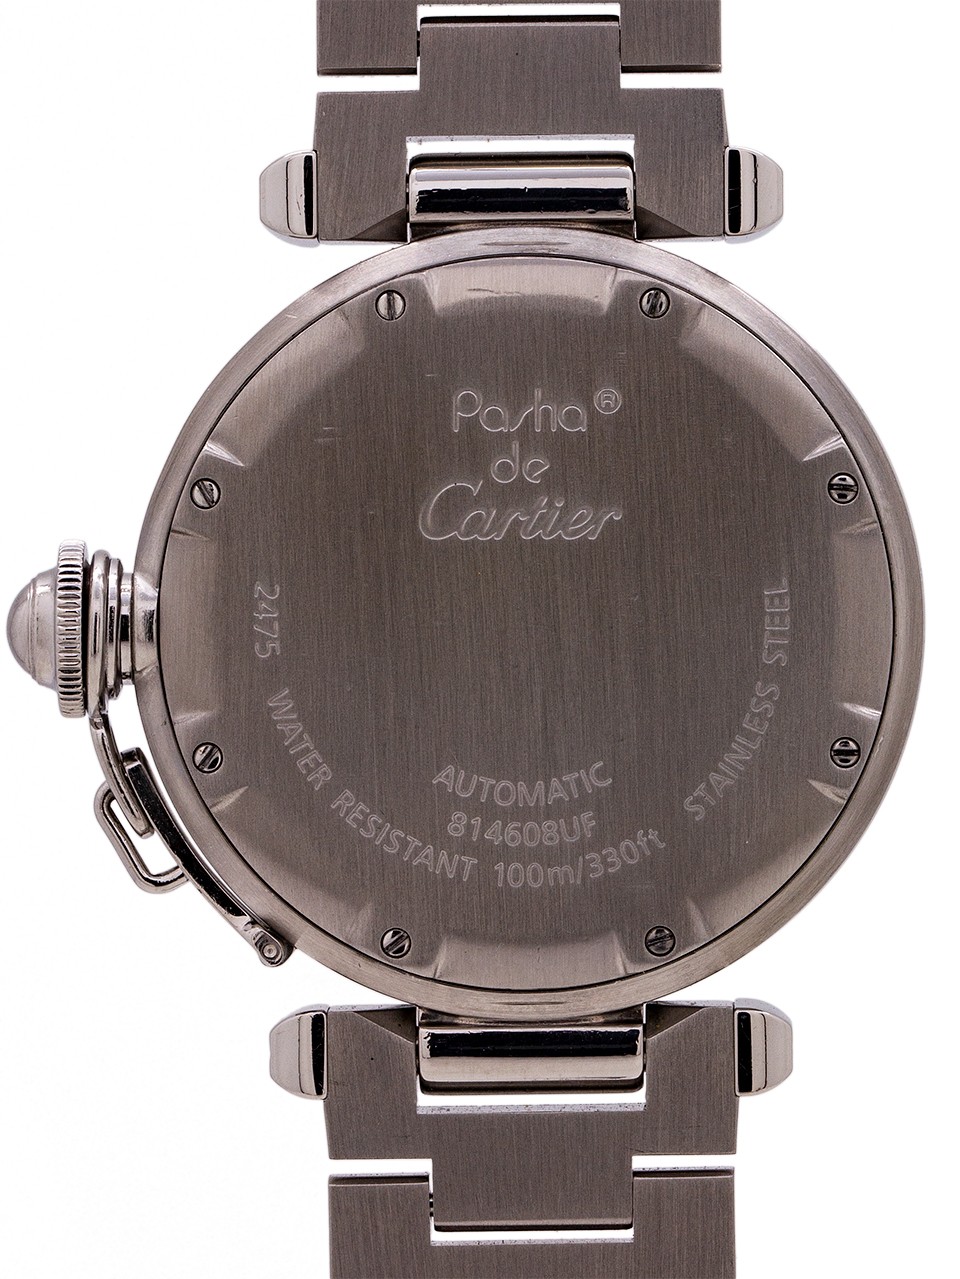 Cartier Pasha C “Big Date” Stainless 